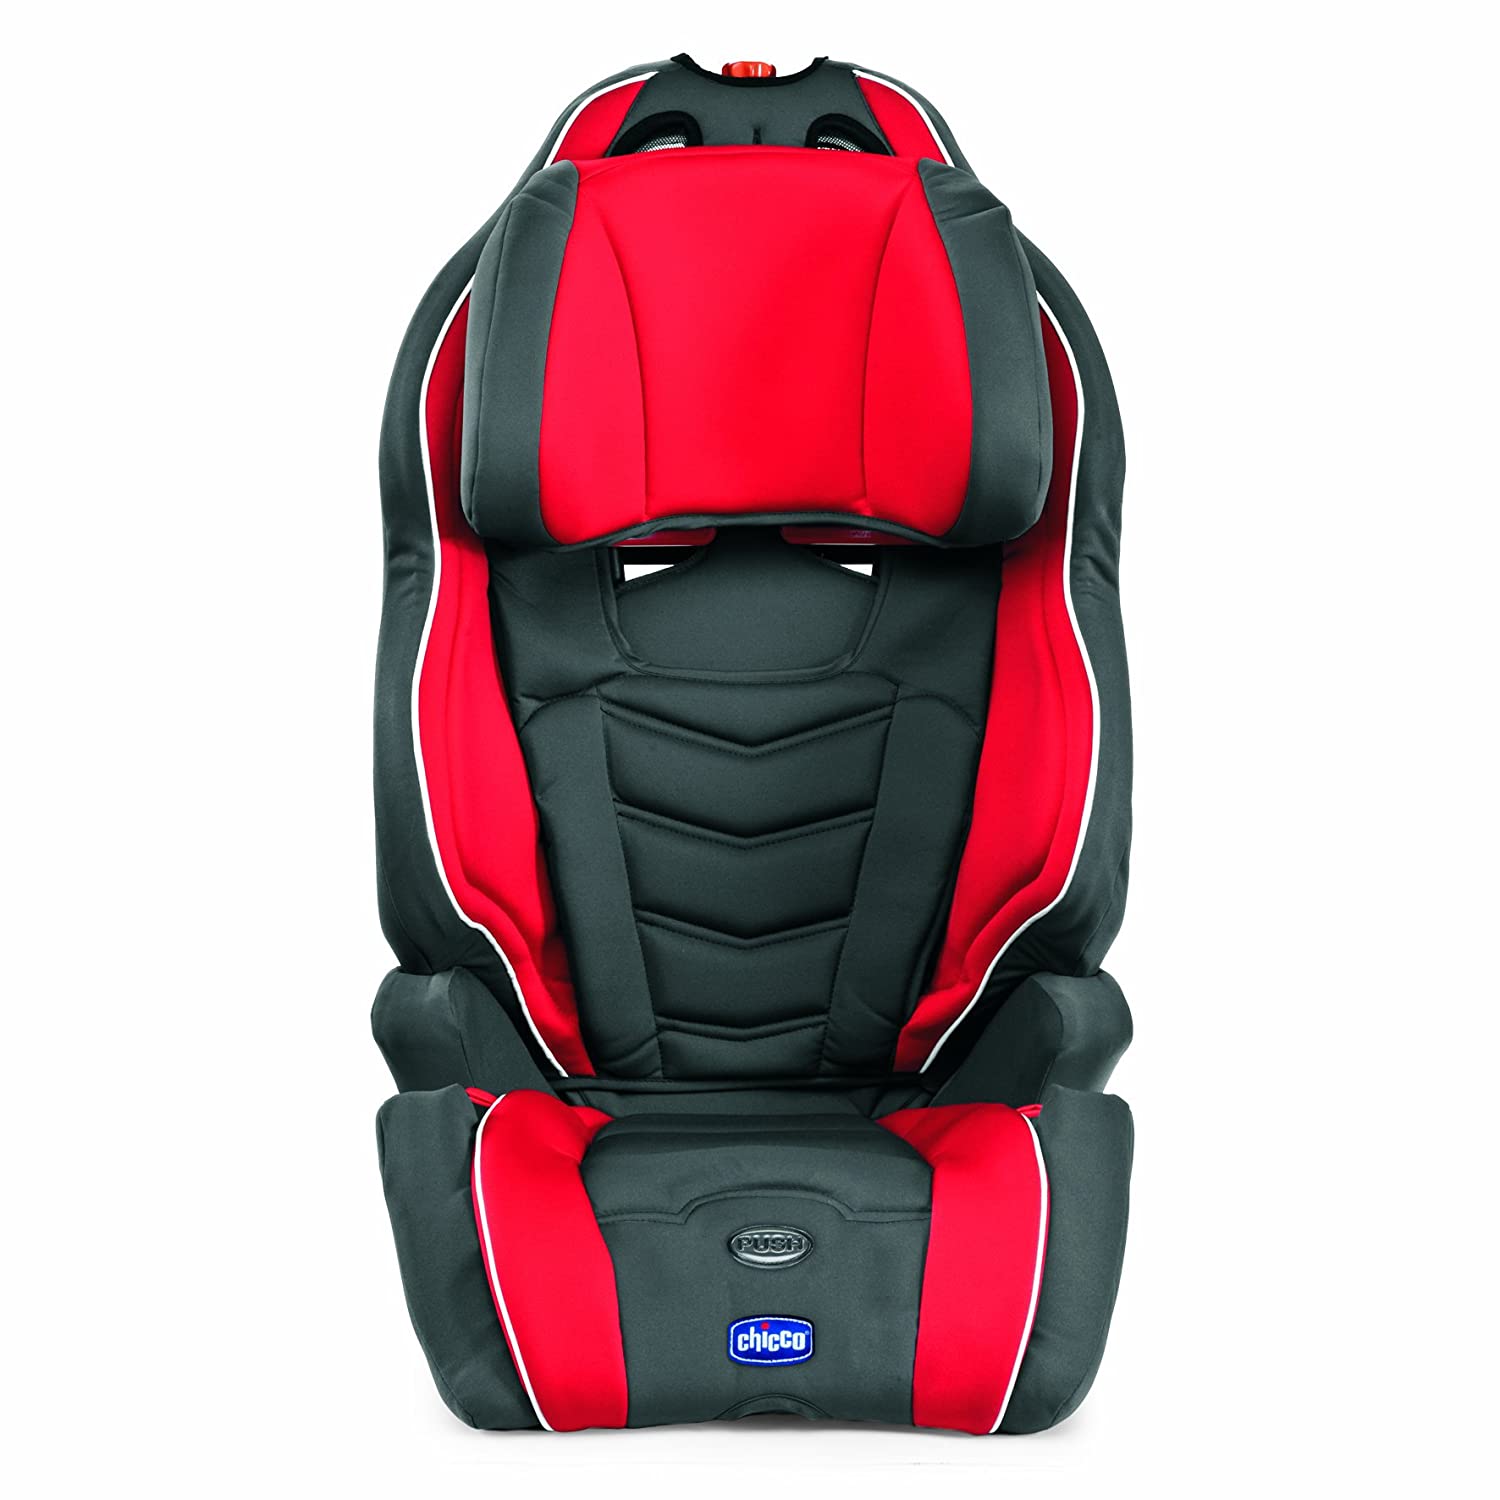 Chicco Neptune 07079079710000 Childs Car Seat Size 1/2/3, Paprika